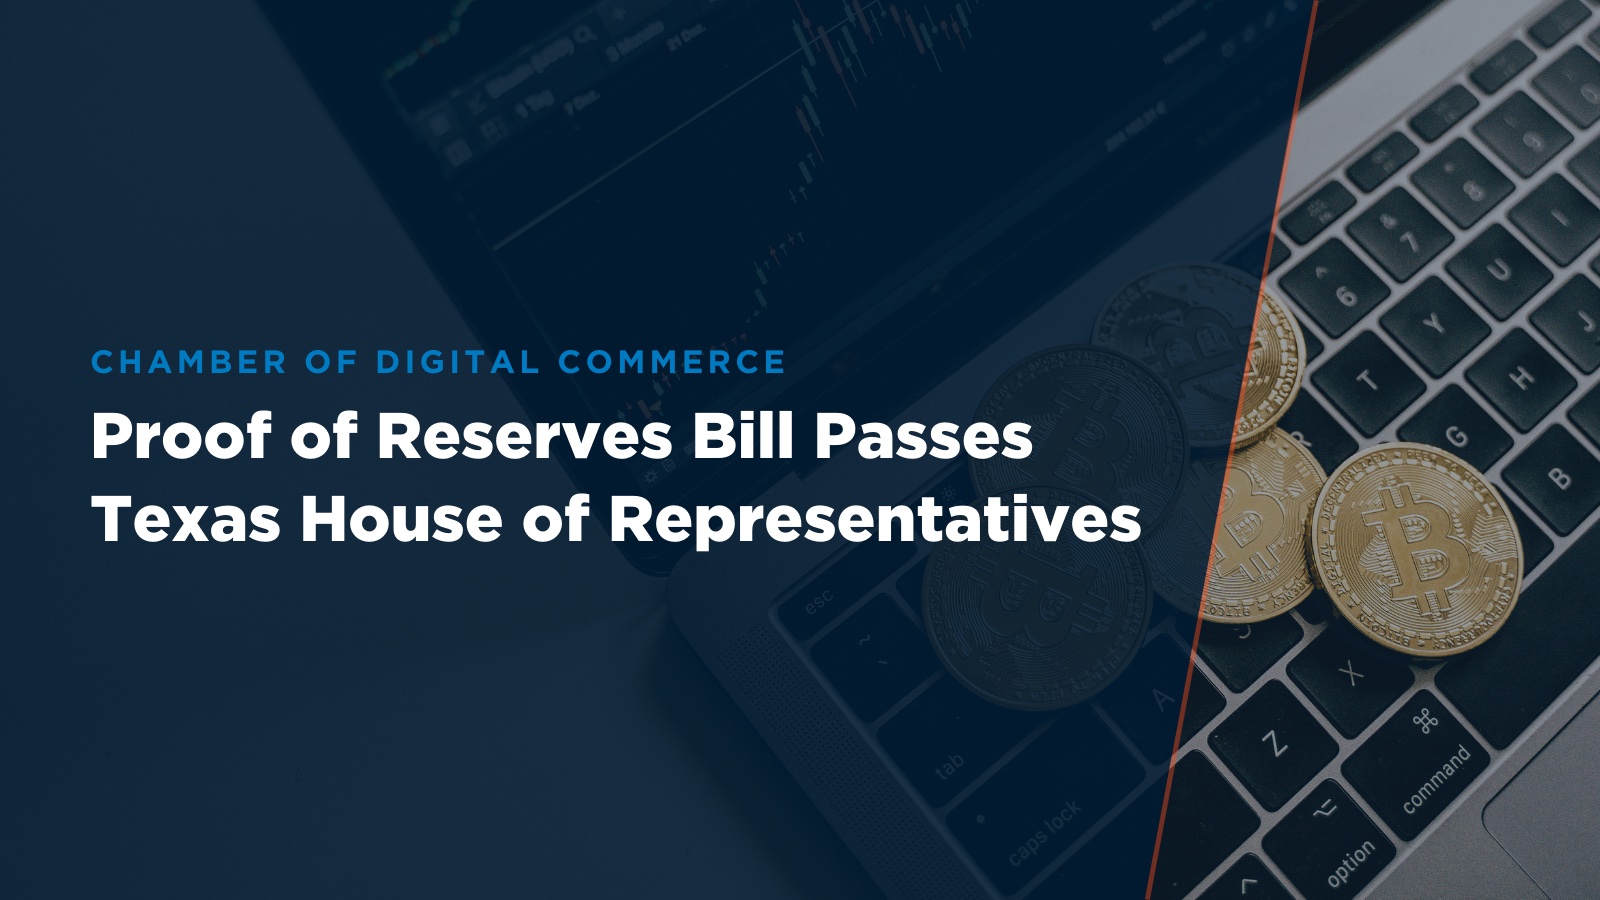 Proof of Reserves Bill Passes Texas House of Representatives Chamber of Digital Commerce